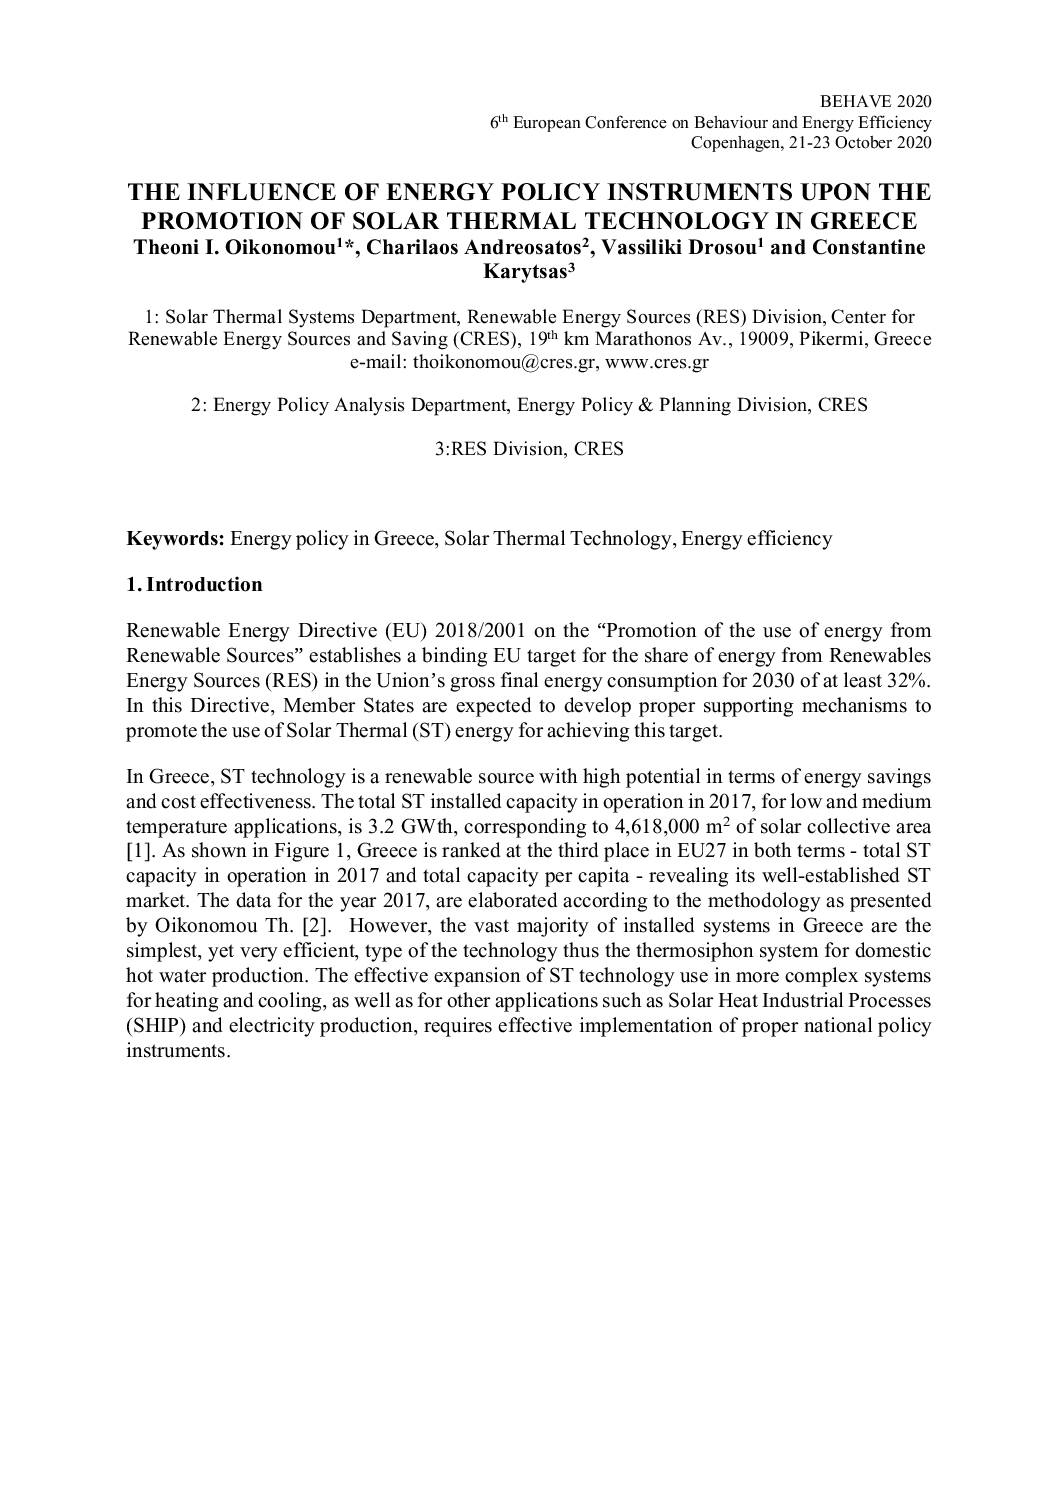 The influence of energy policy instruments upon the promotion of solar thermal technology in Greece